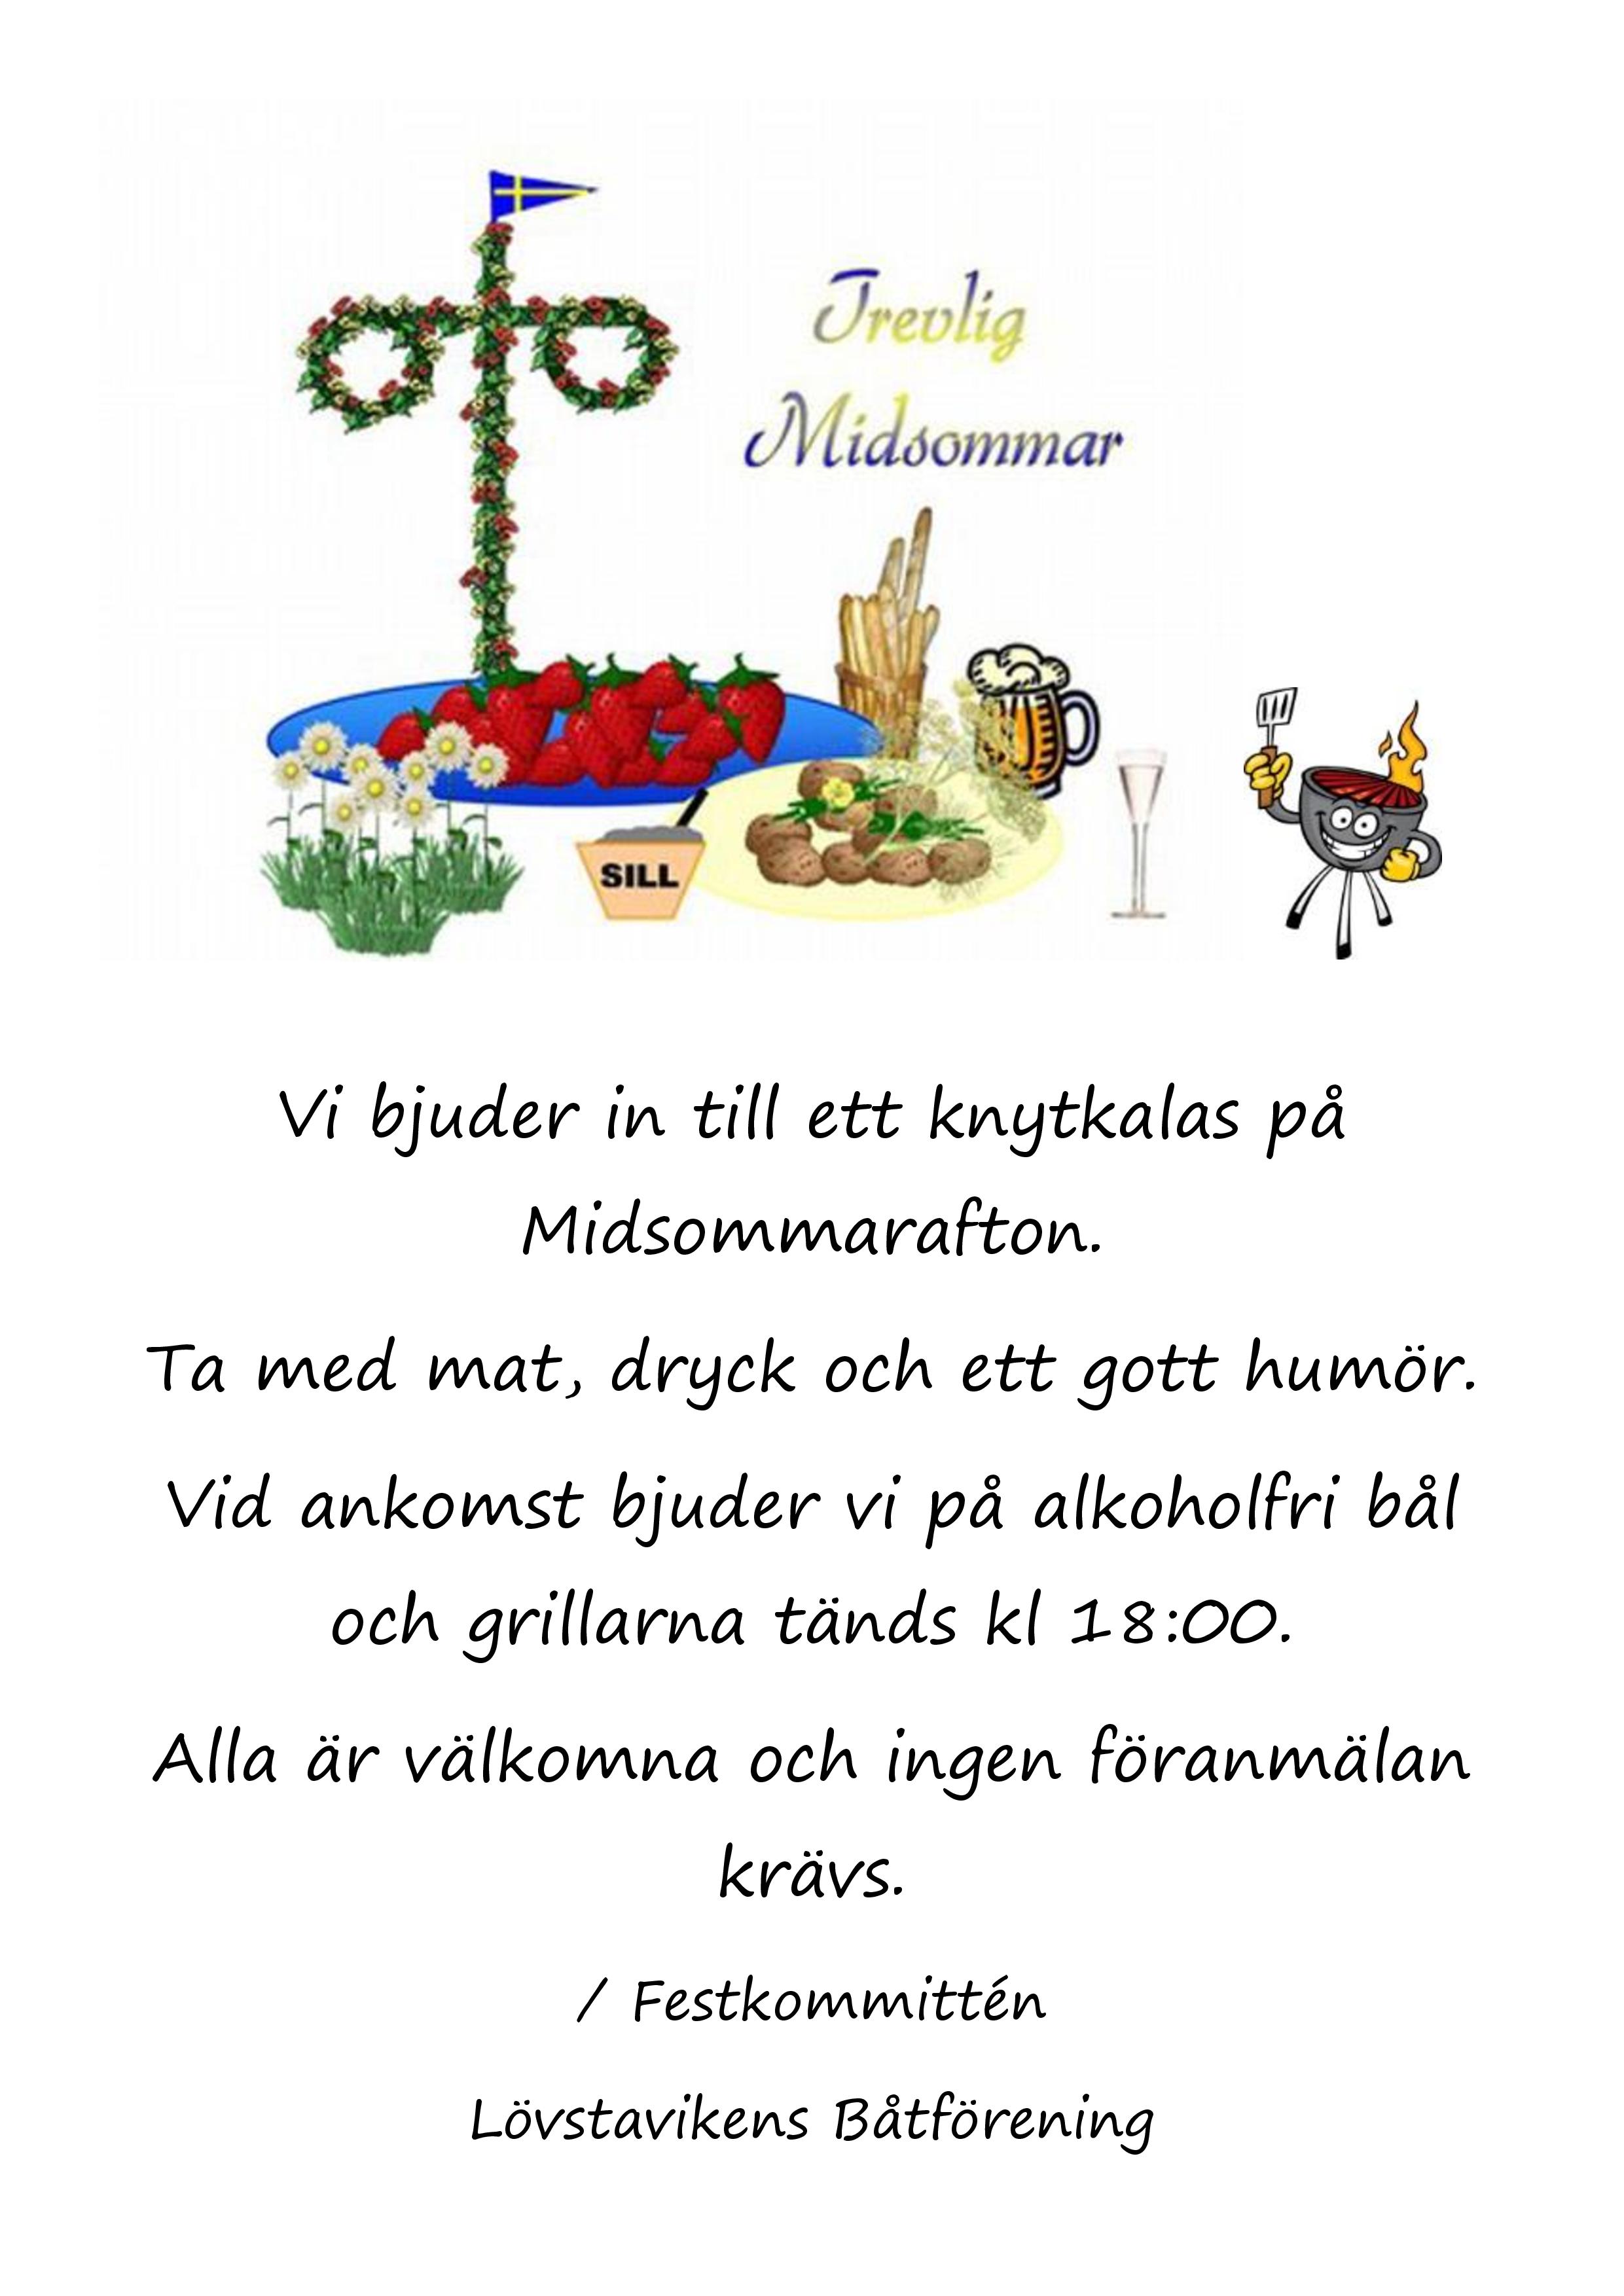 midsommar2018-page-001